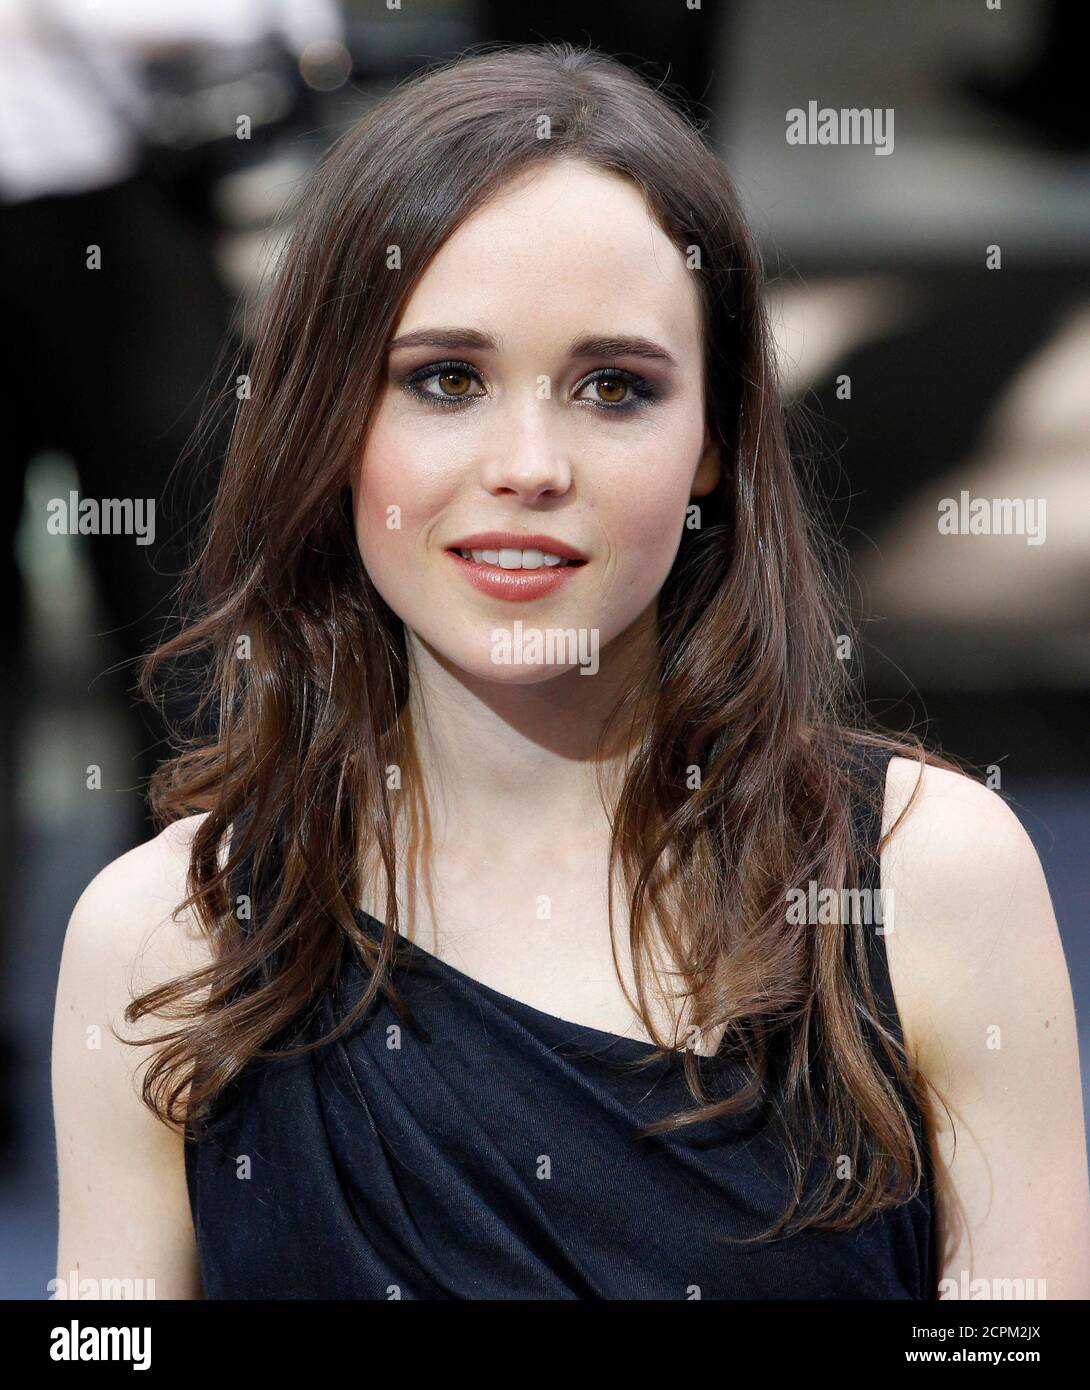 Canadian actress Ellen Page arrives for the world premiere of the film  ''Inception'' at the Odeon in London July 8, 2010. REUTERS/Stefan Wermuth  (BRITAIN - Tags: ENTERTAINMENT SOCIETY Stock Photo - Alamy